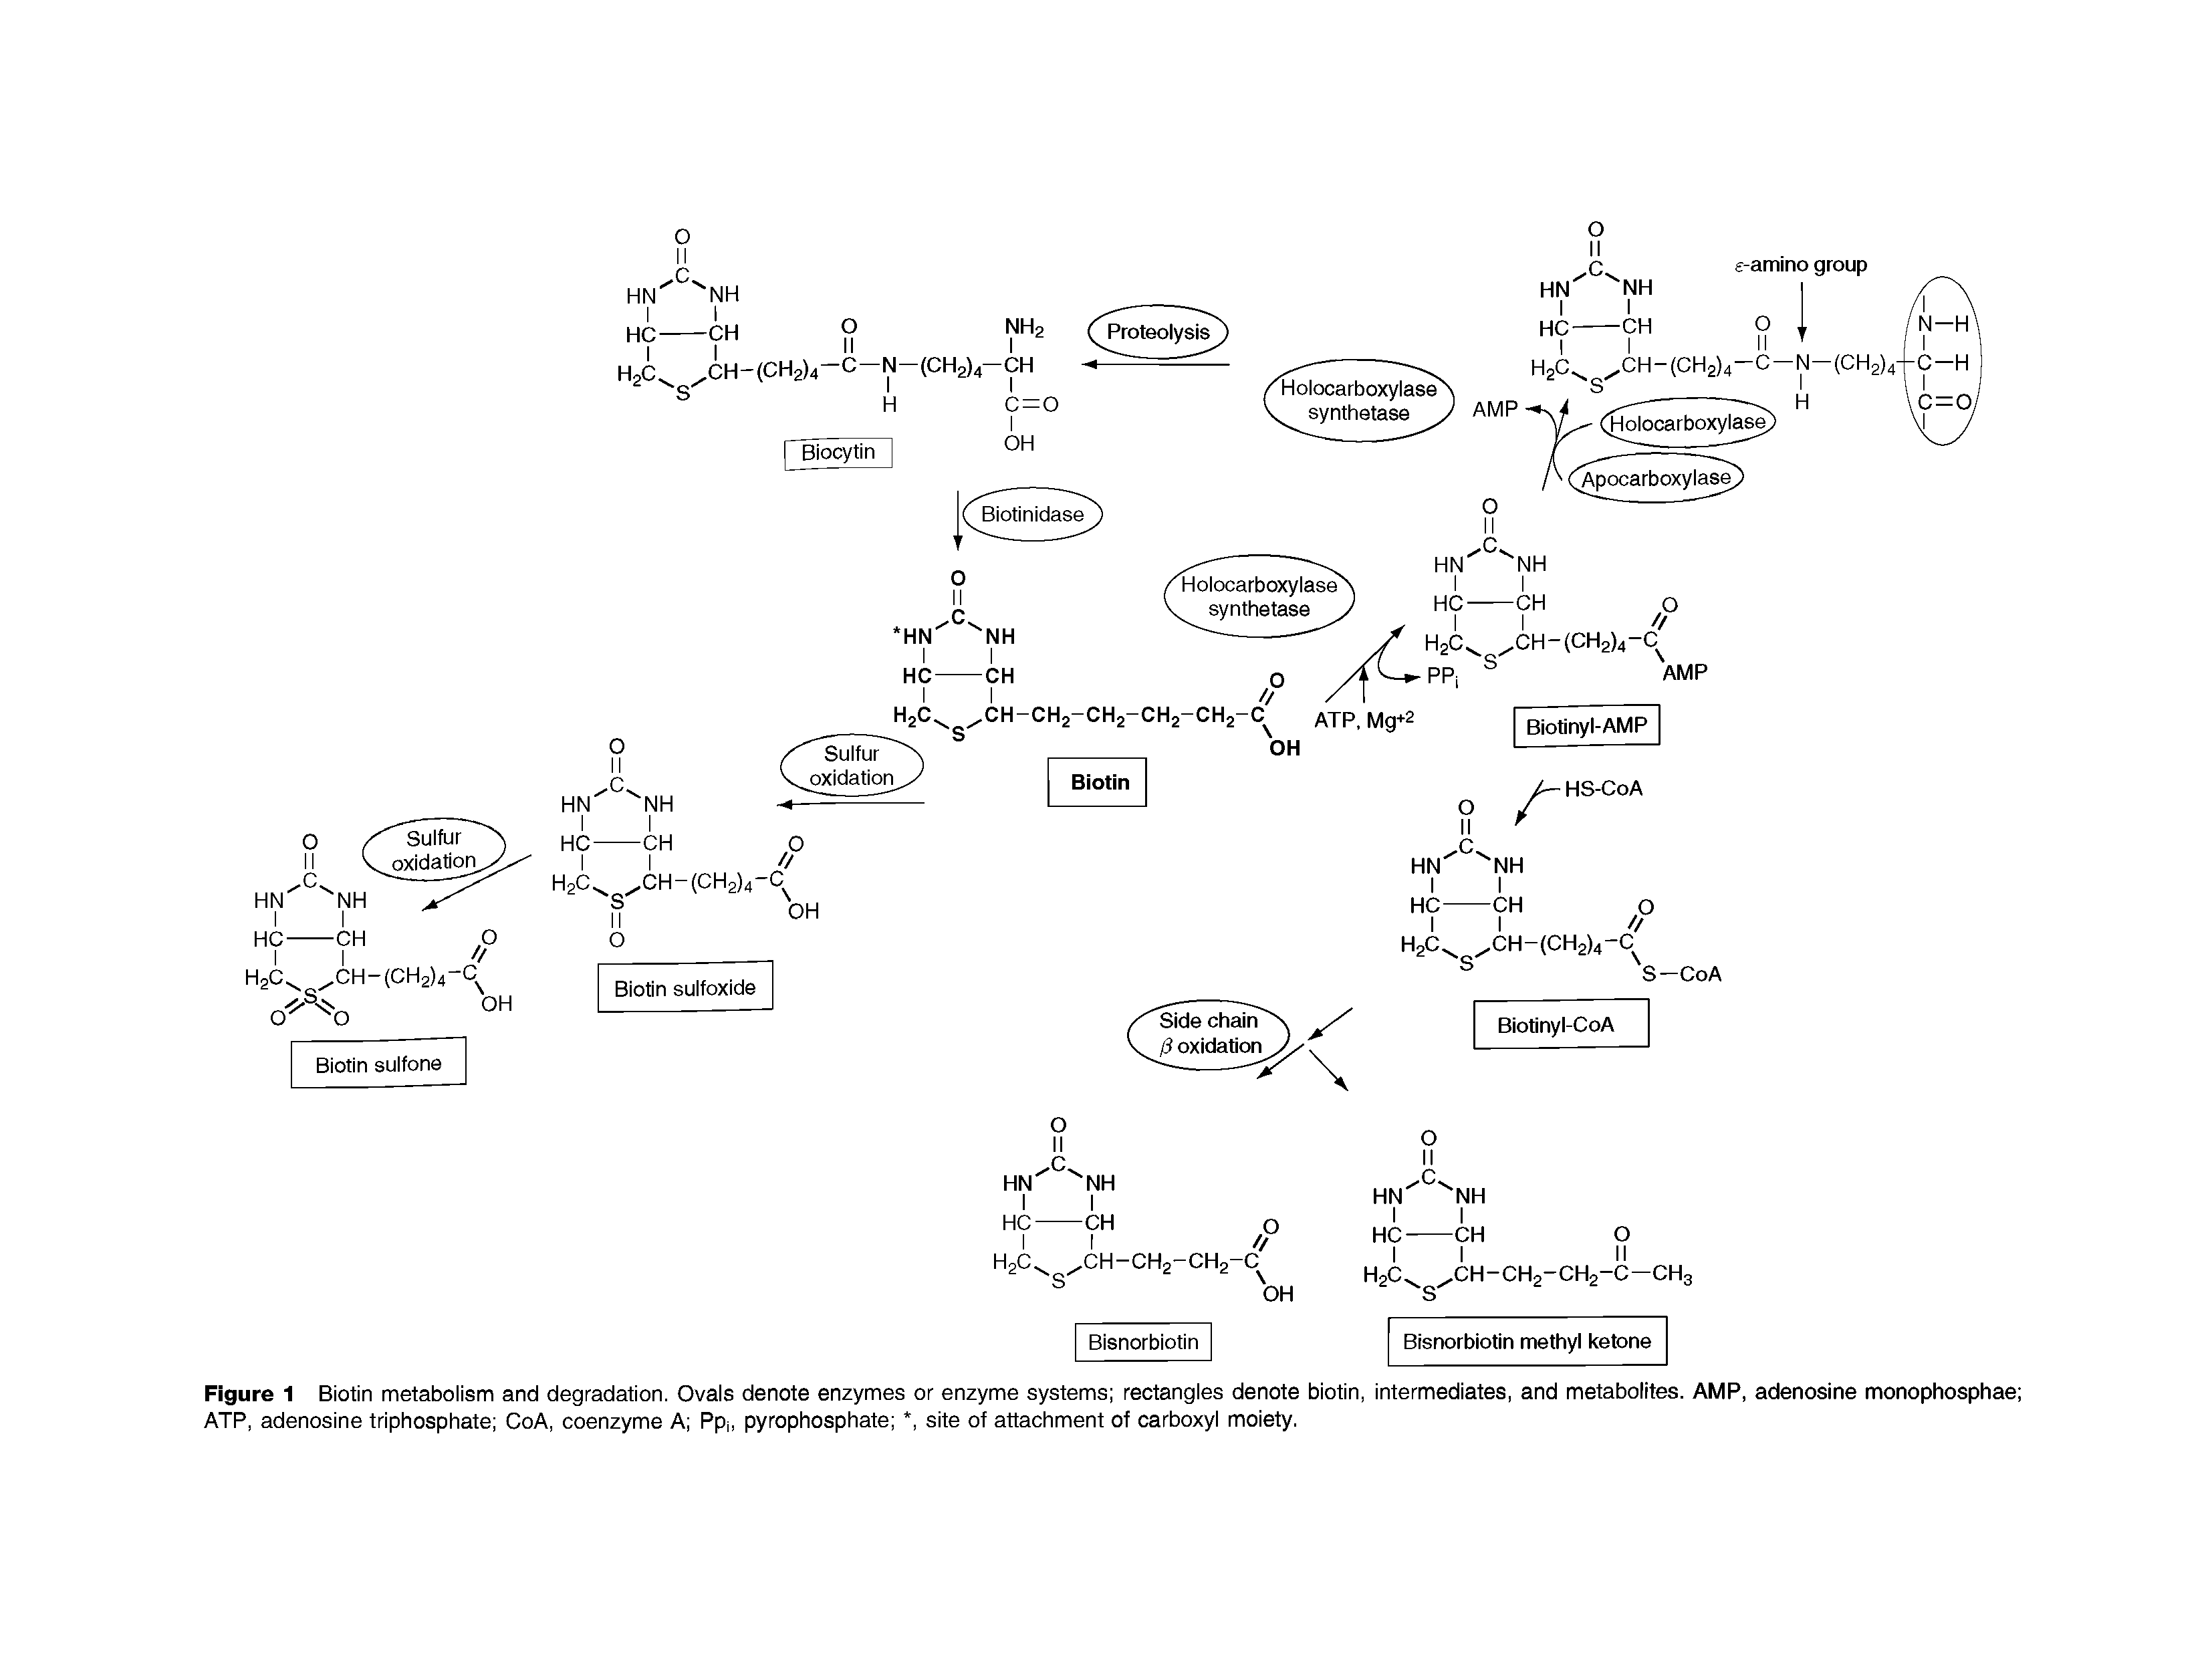 Figure 1 Biotin metabolism and degradation. Ovals denote enzymes or enzyme systems rectangles denote biotin, intermediates, and metabolites. AMP, adenosine monophosphae ATP, adenosine triphosphate CoA, coenzyme A Ppi, pyrophosphate , site of attachment of carboxyl moiety.